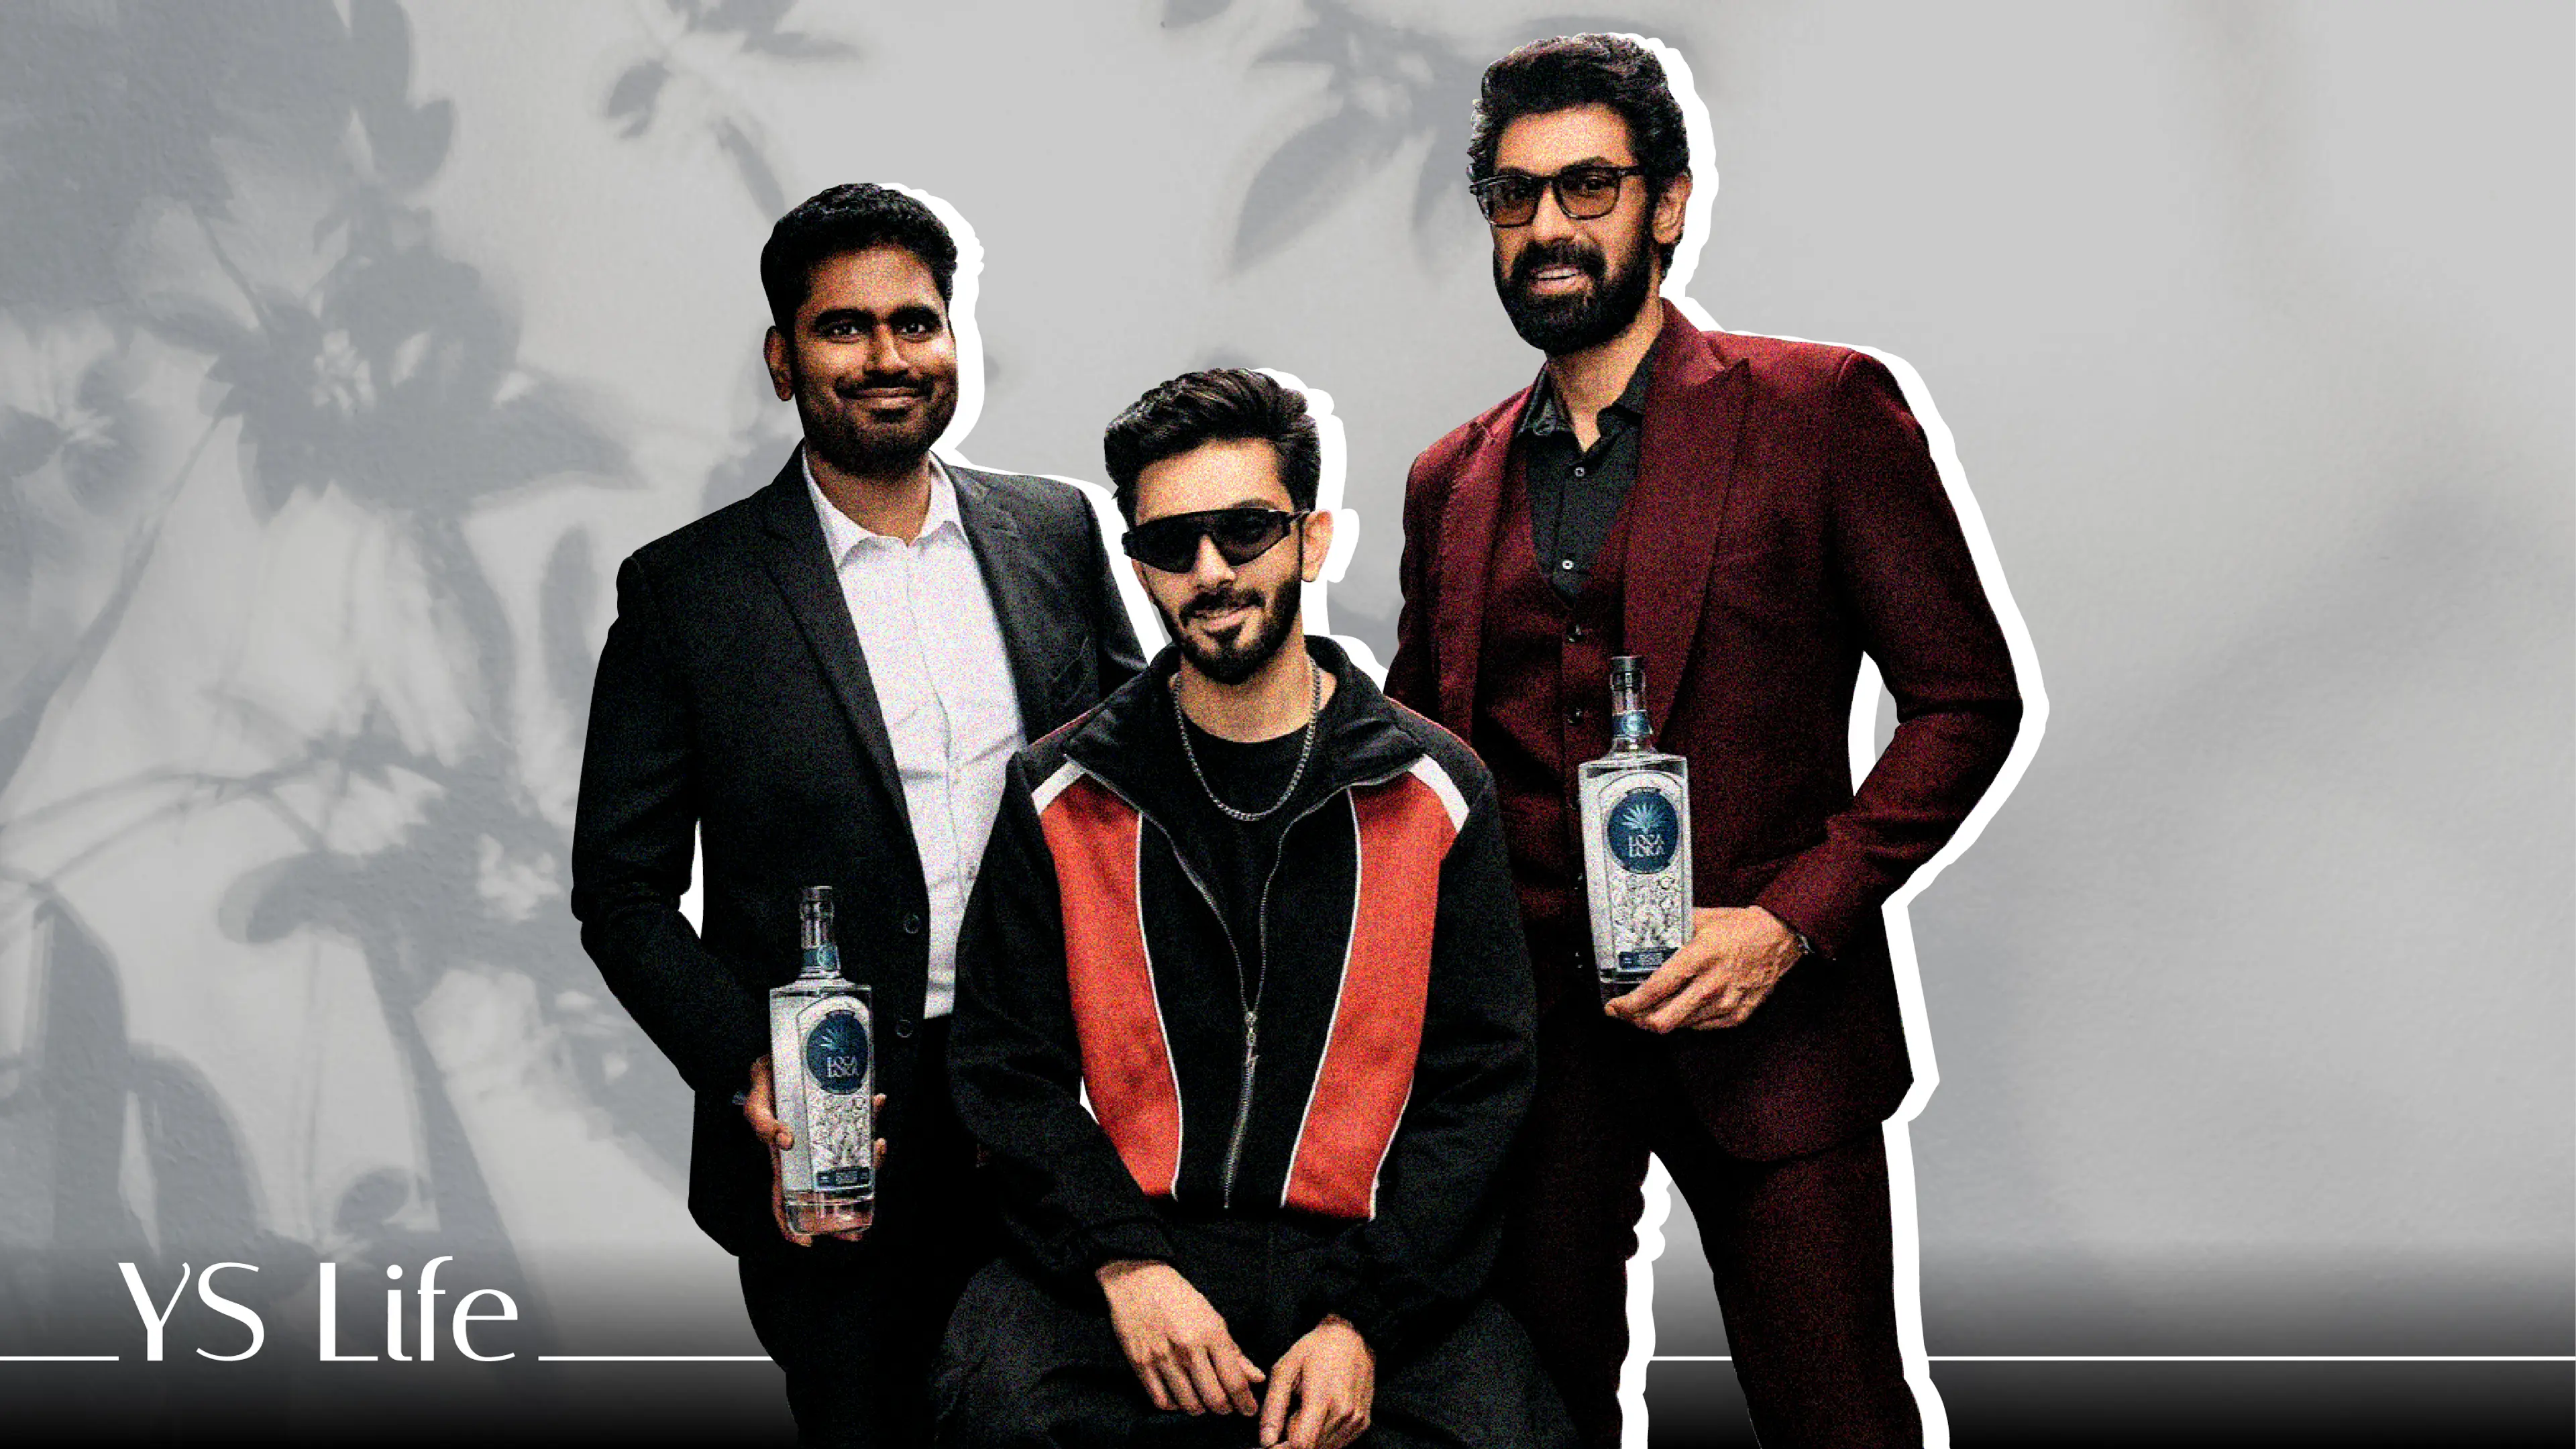 [Exclusive] Anirudh and Rana Daggubati’s tequila brand Loca Loka blends the best of Mexico and India in a bottle